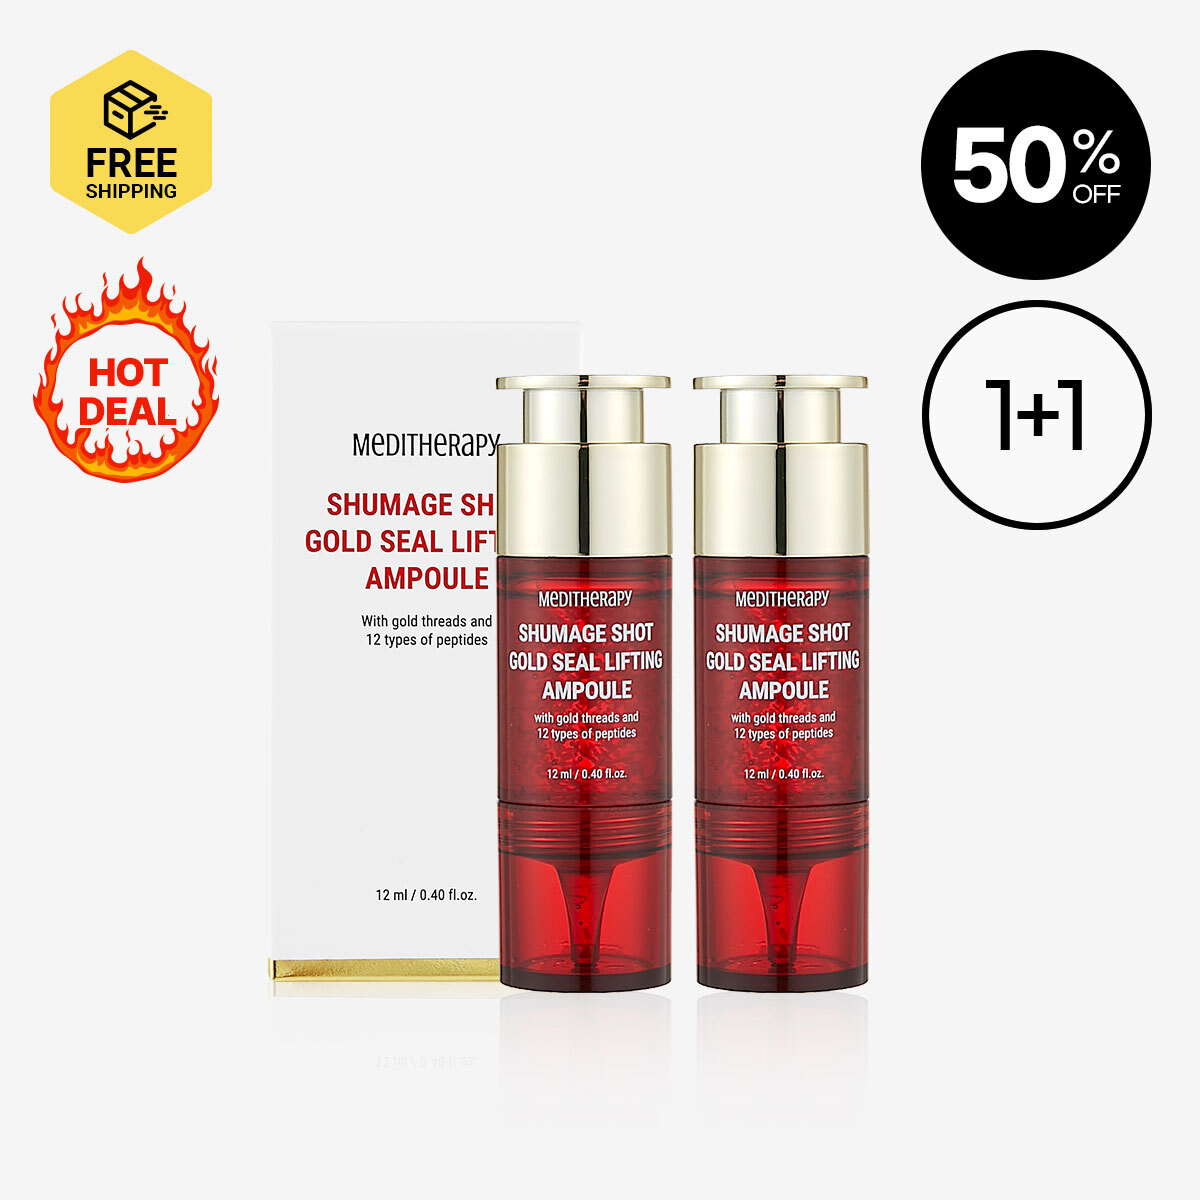 [MEDITHERAPY] Shumage Shot Gold Seal Lifting Ampoule 1+1